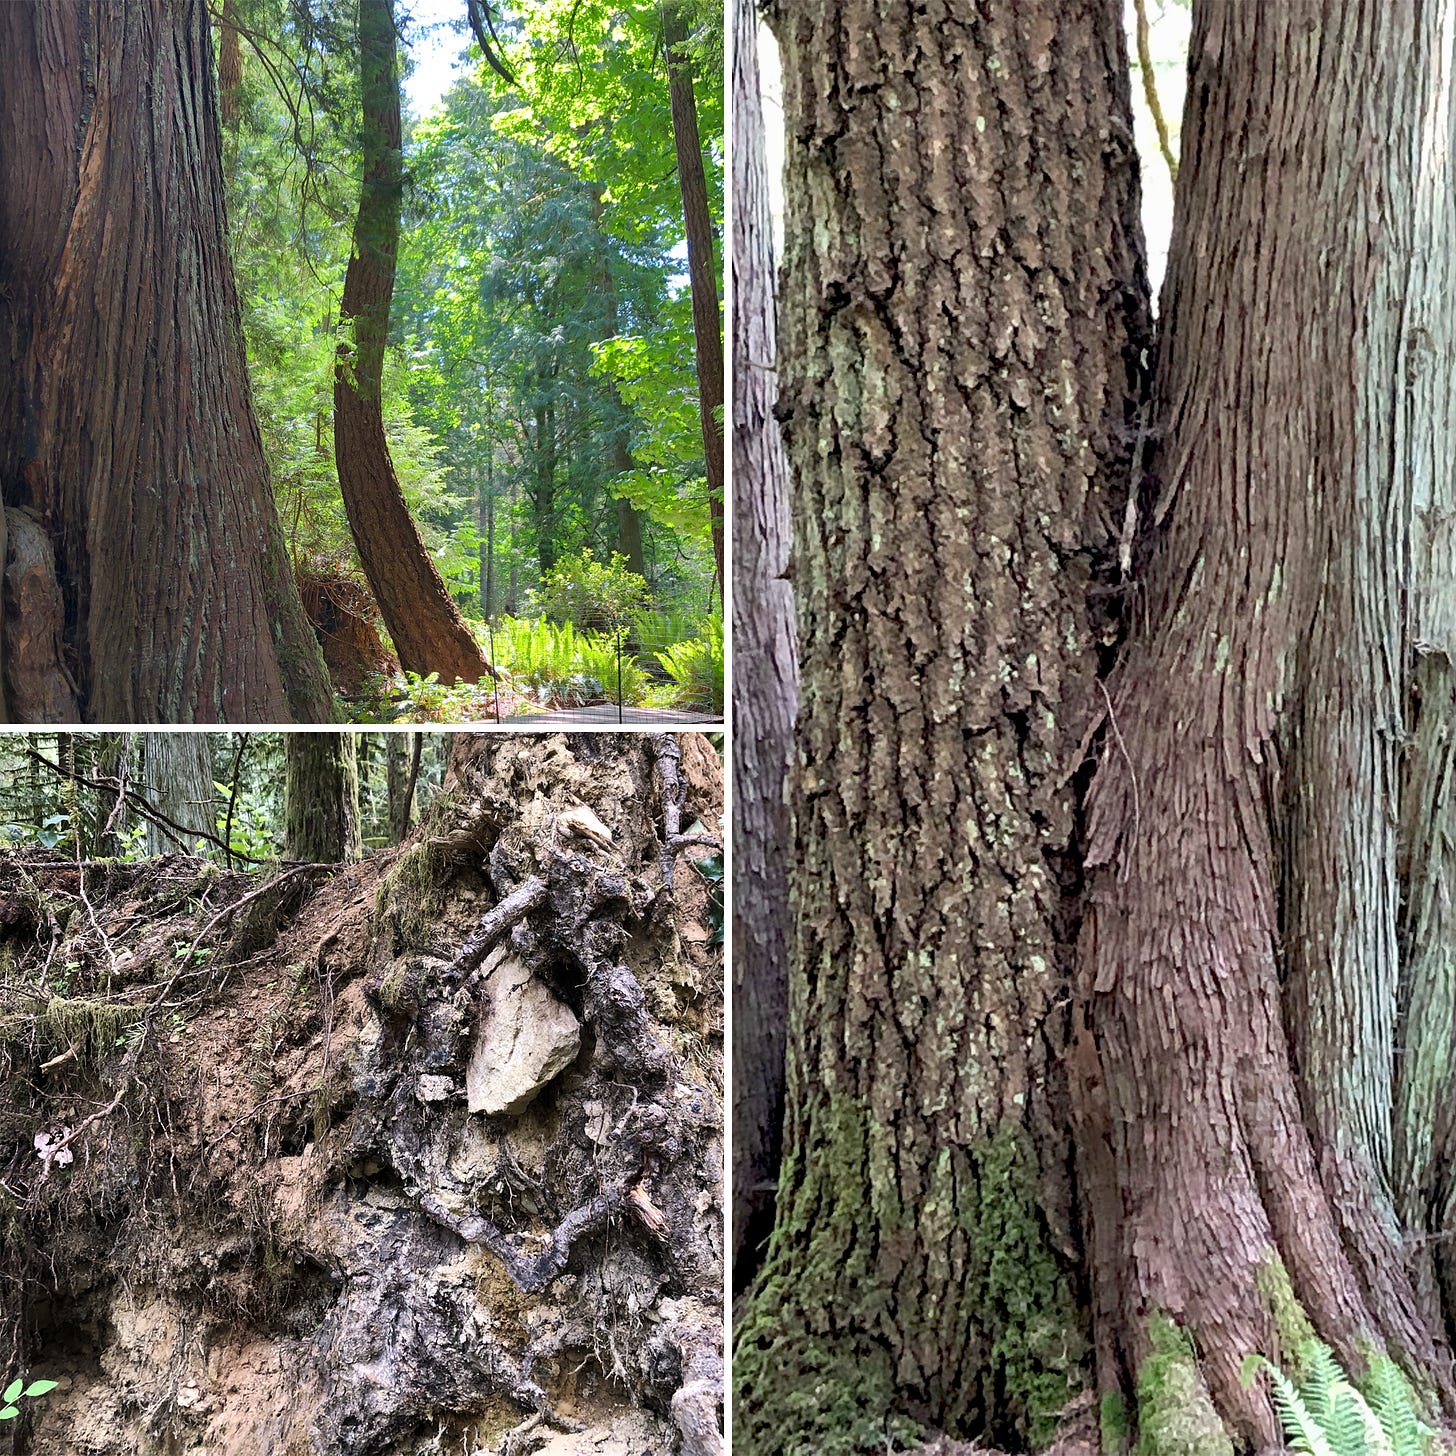 Montage of a curved tree, two trunks with different bark joined together, and a mess of root and dirt with large pale rock visible.